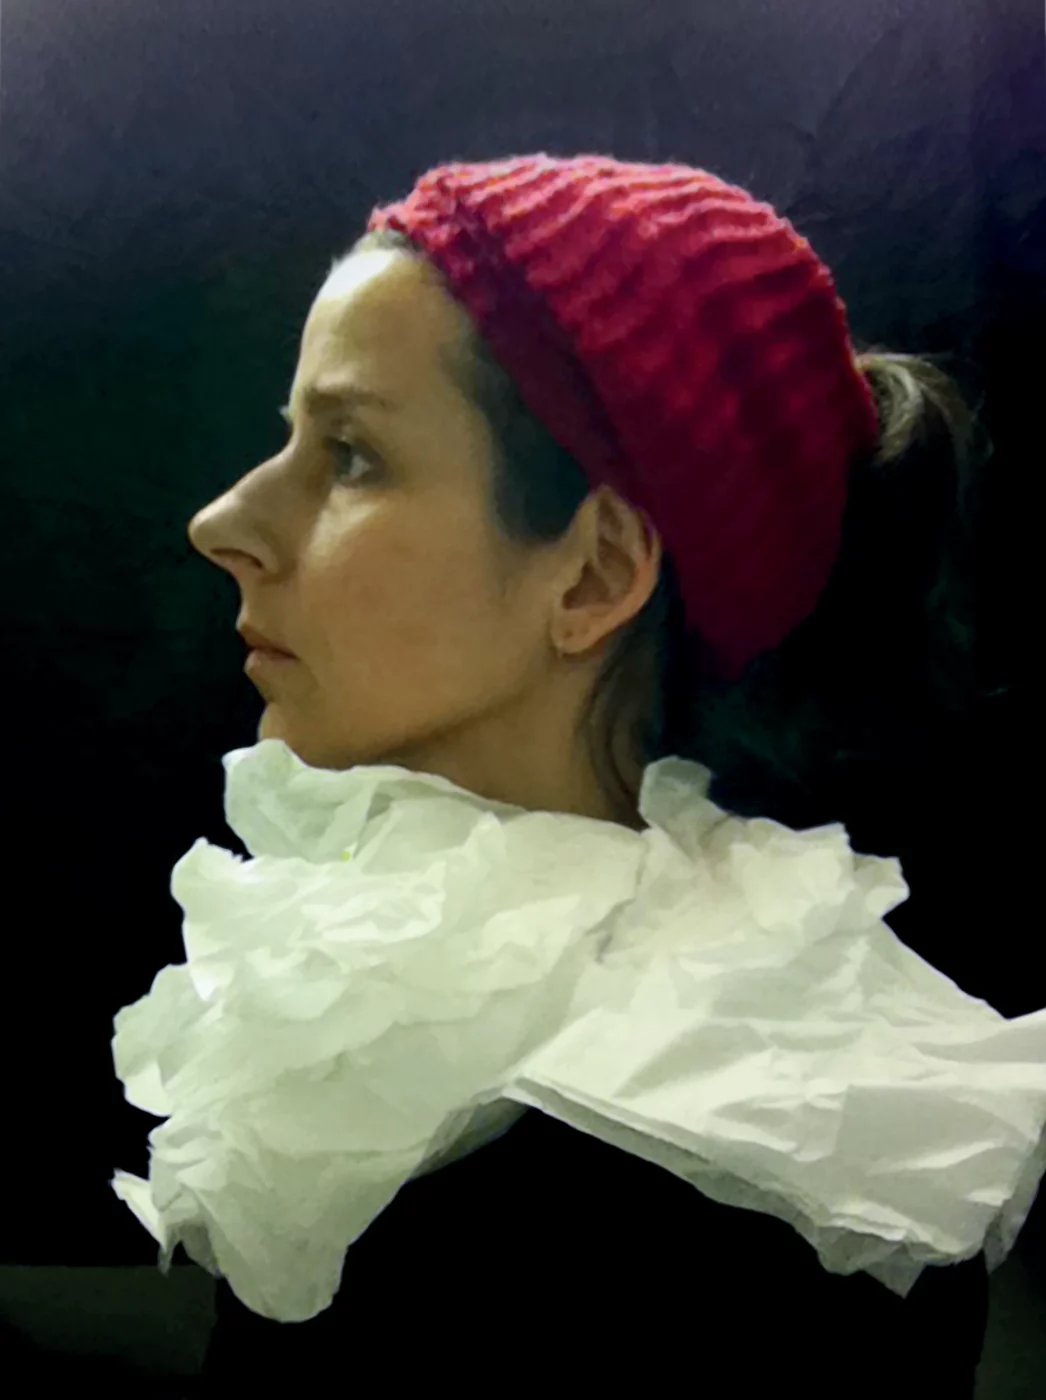 Nina Katchadourian. <em>Lavatory Self-Portrait in the Flemish Style #5</em>, from <em>Seat Assignment</em> project, 2011. Courtesy of the artist, Catharine Clark Gallery and Pace Gallery.